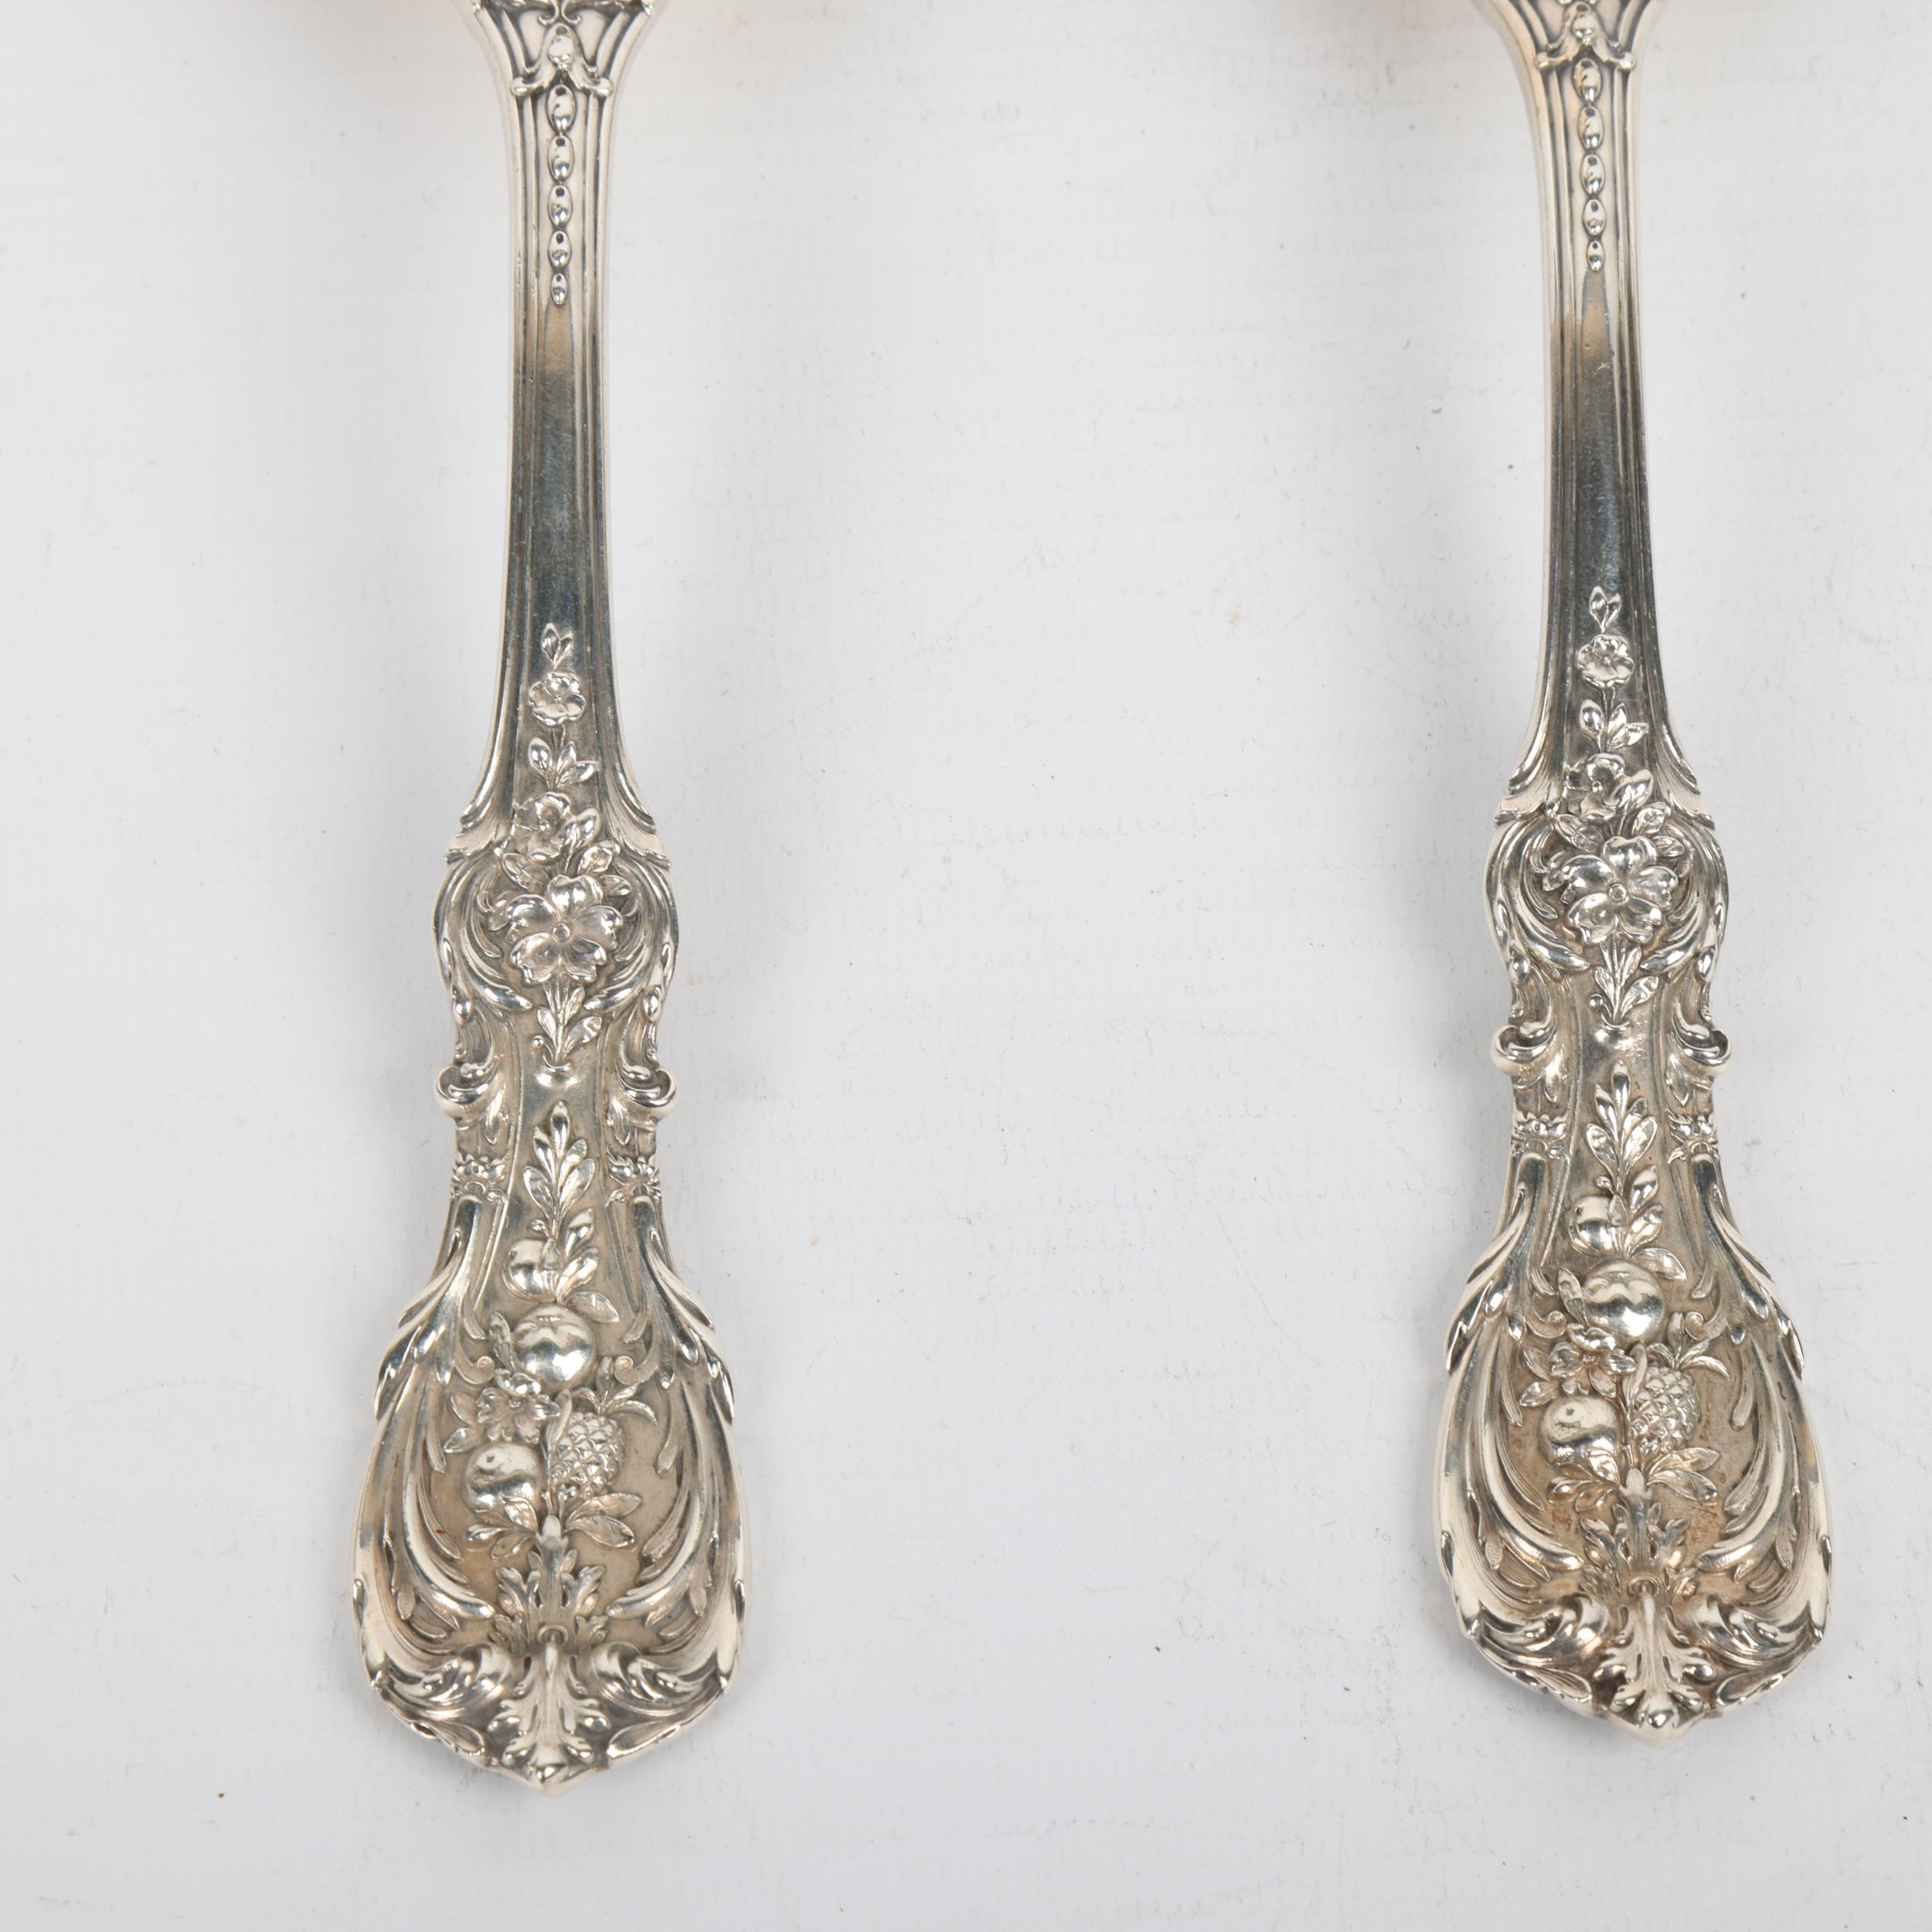 A pair of American sterling silver dessert servers, William Wise & Son, relief cast fruit and - Image 2 of 3